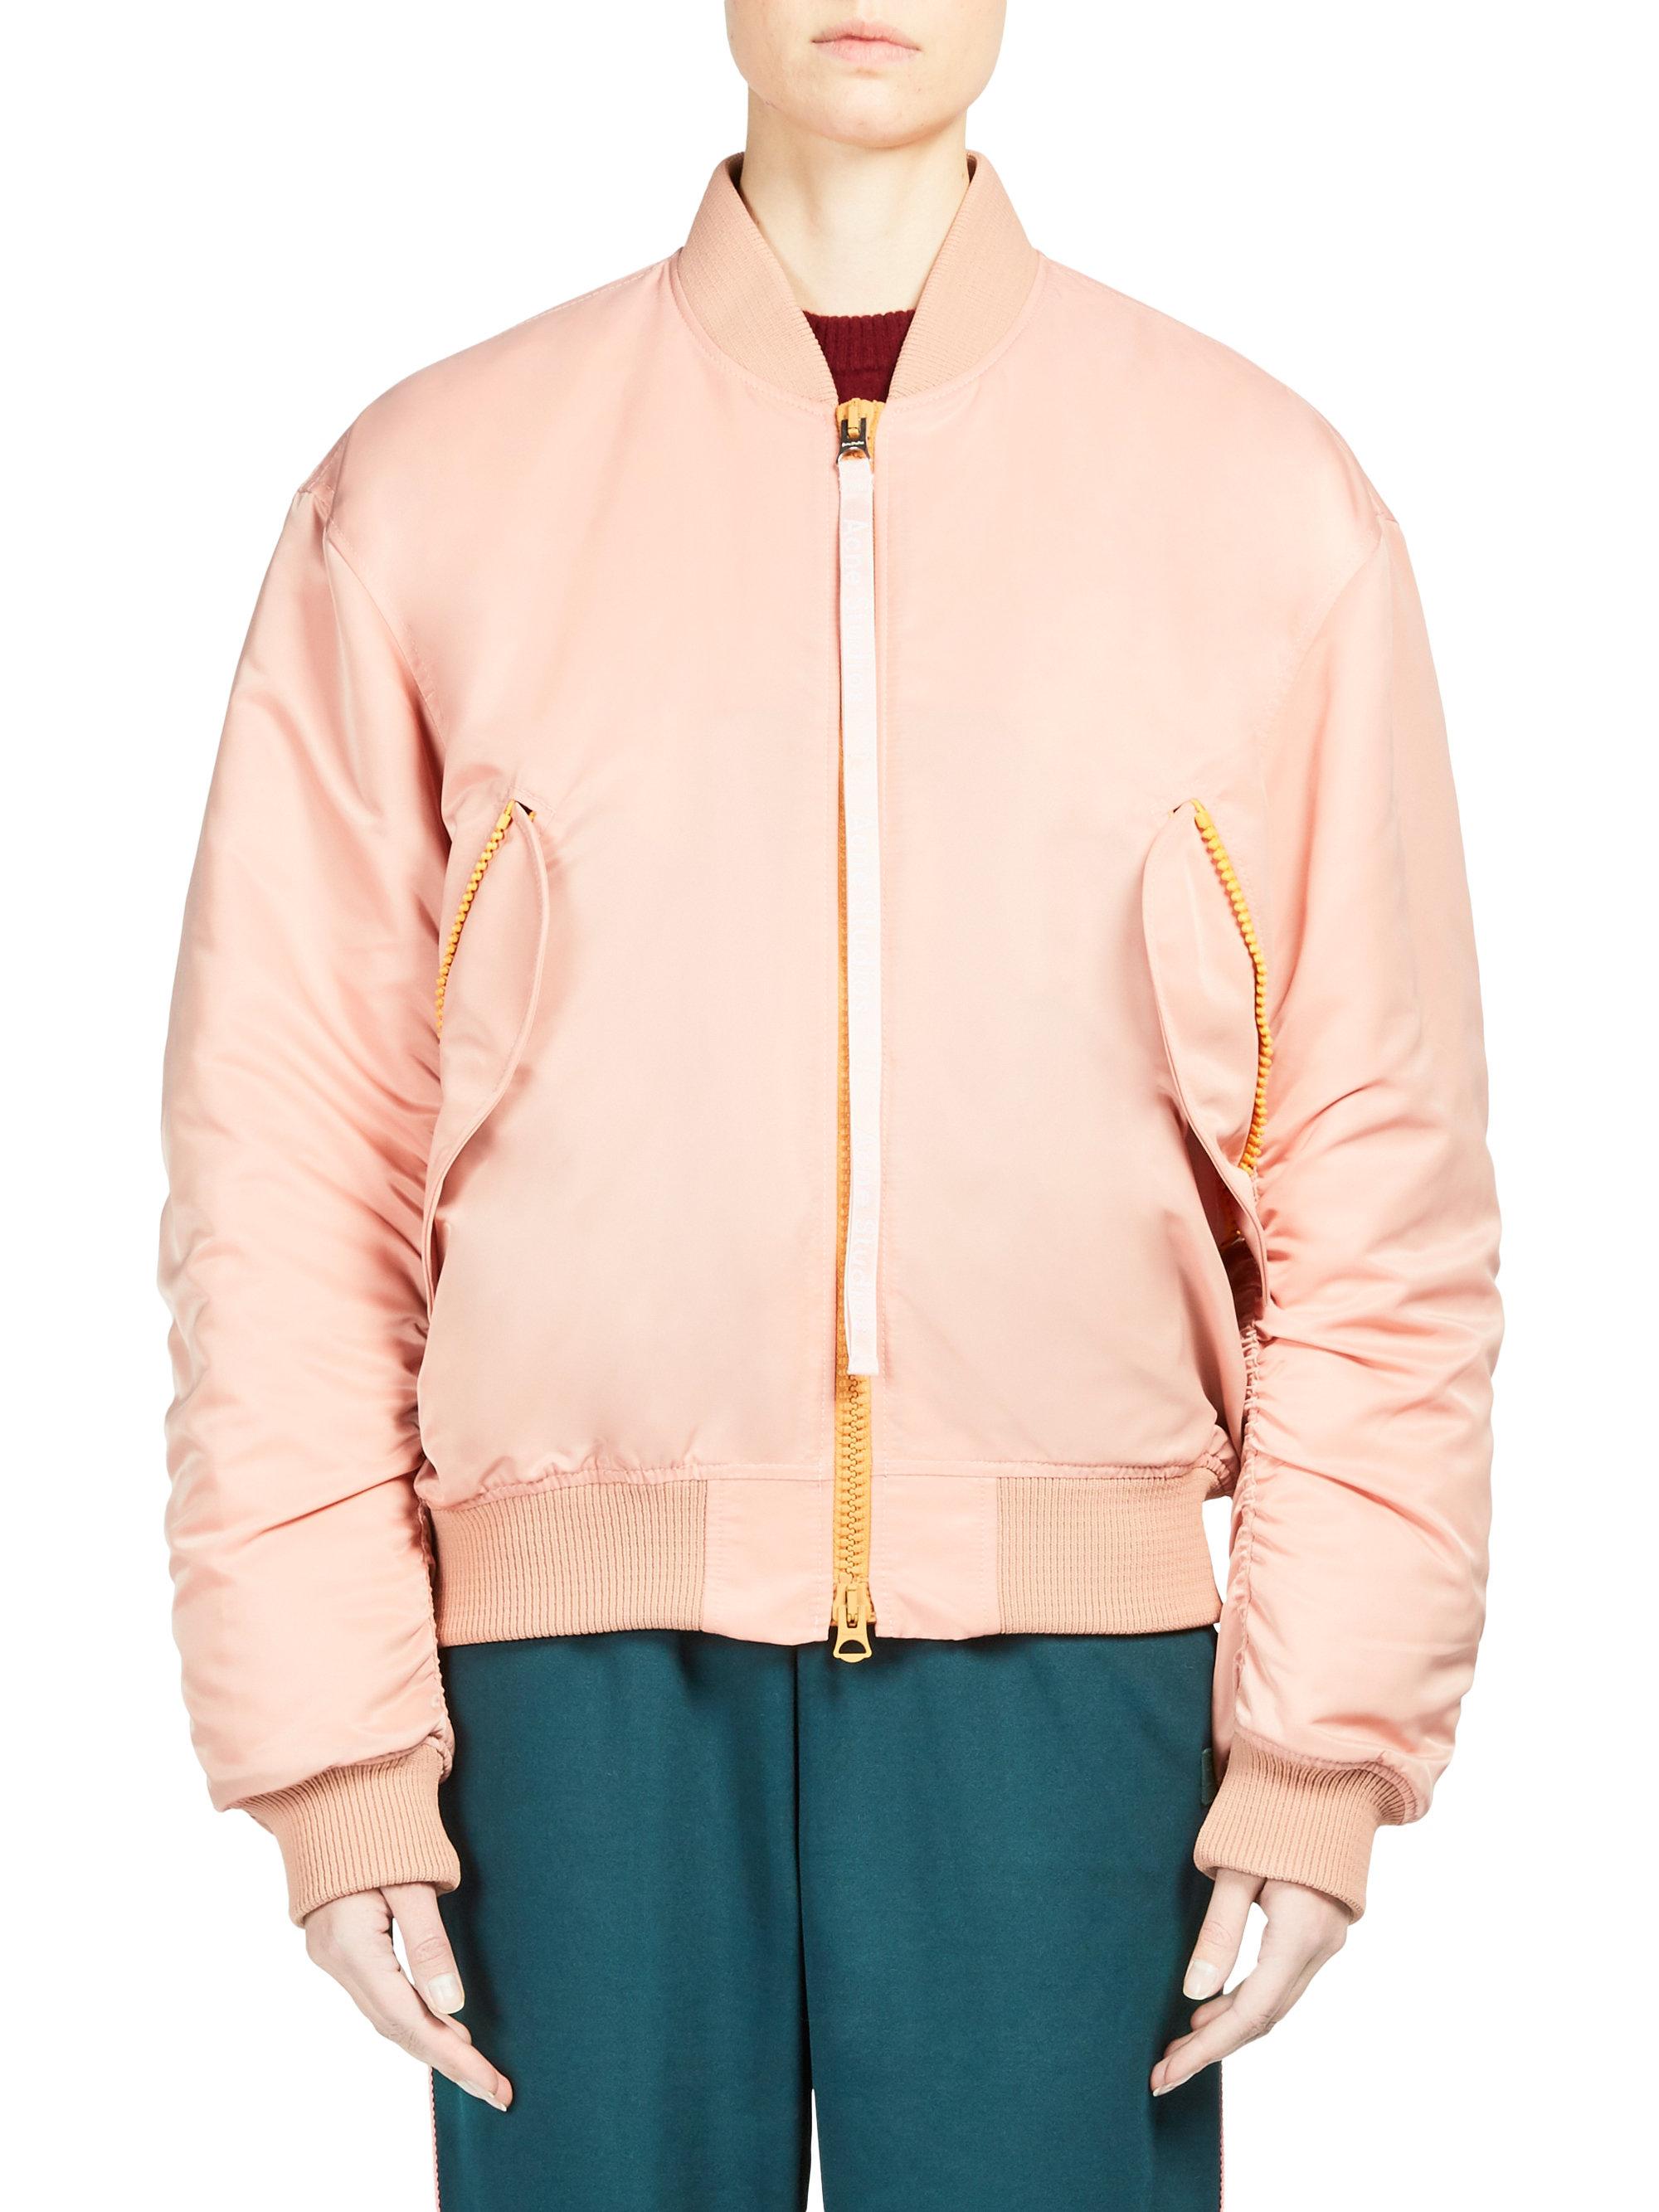 Lyst - Acne Clea Bomber Jacket in Pink for Men